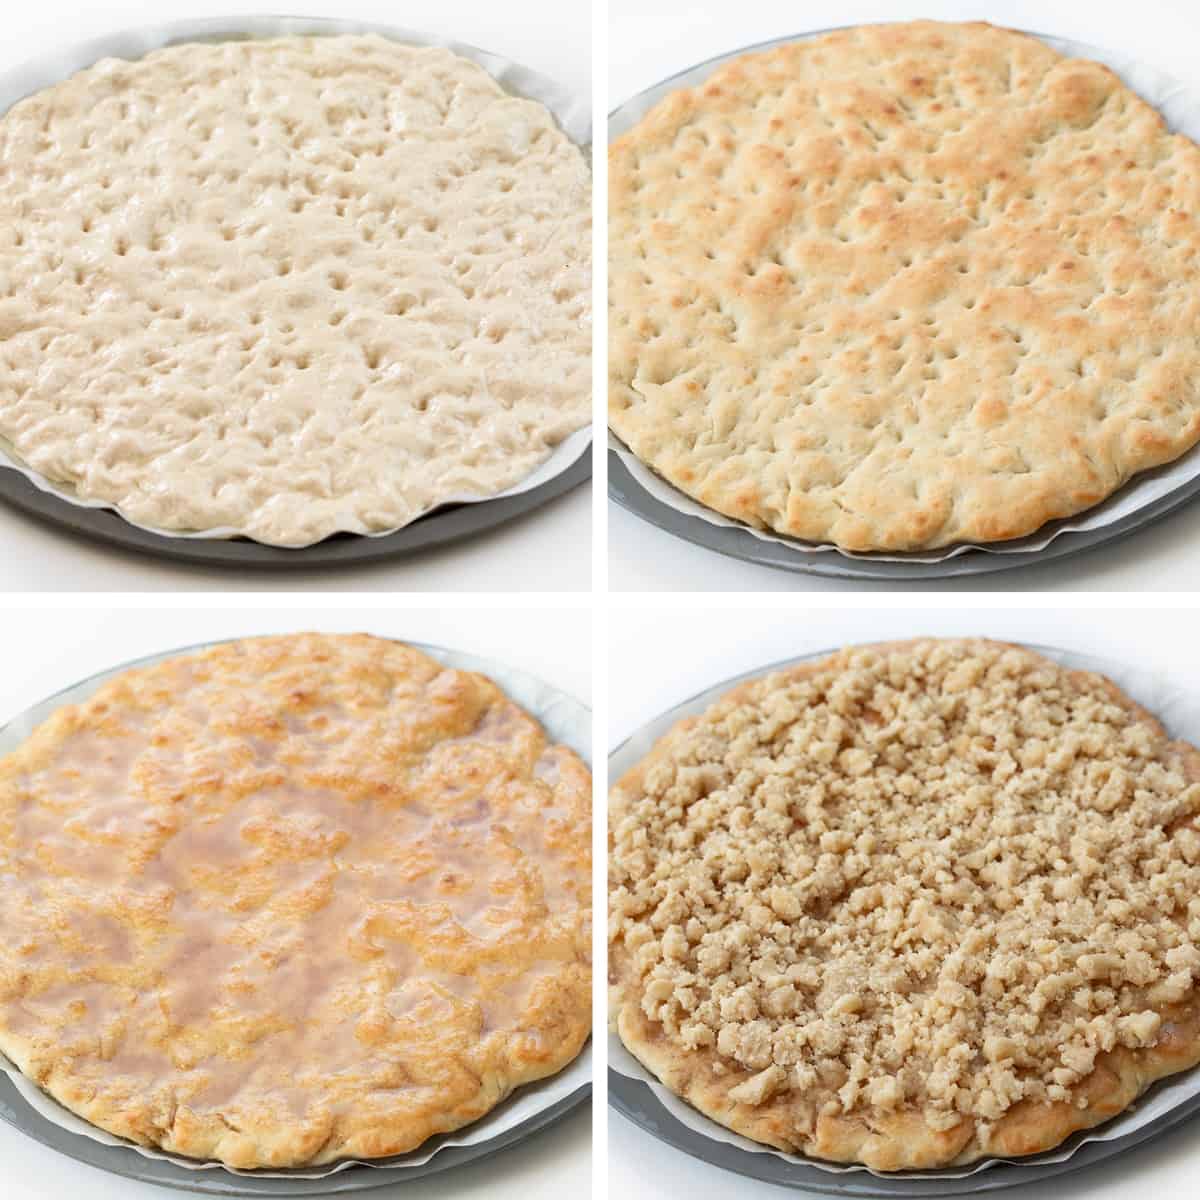 Steps for Making and Assembling a Dessert Pizza (Copycat Cactus Bread).